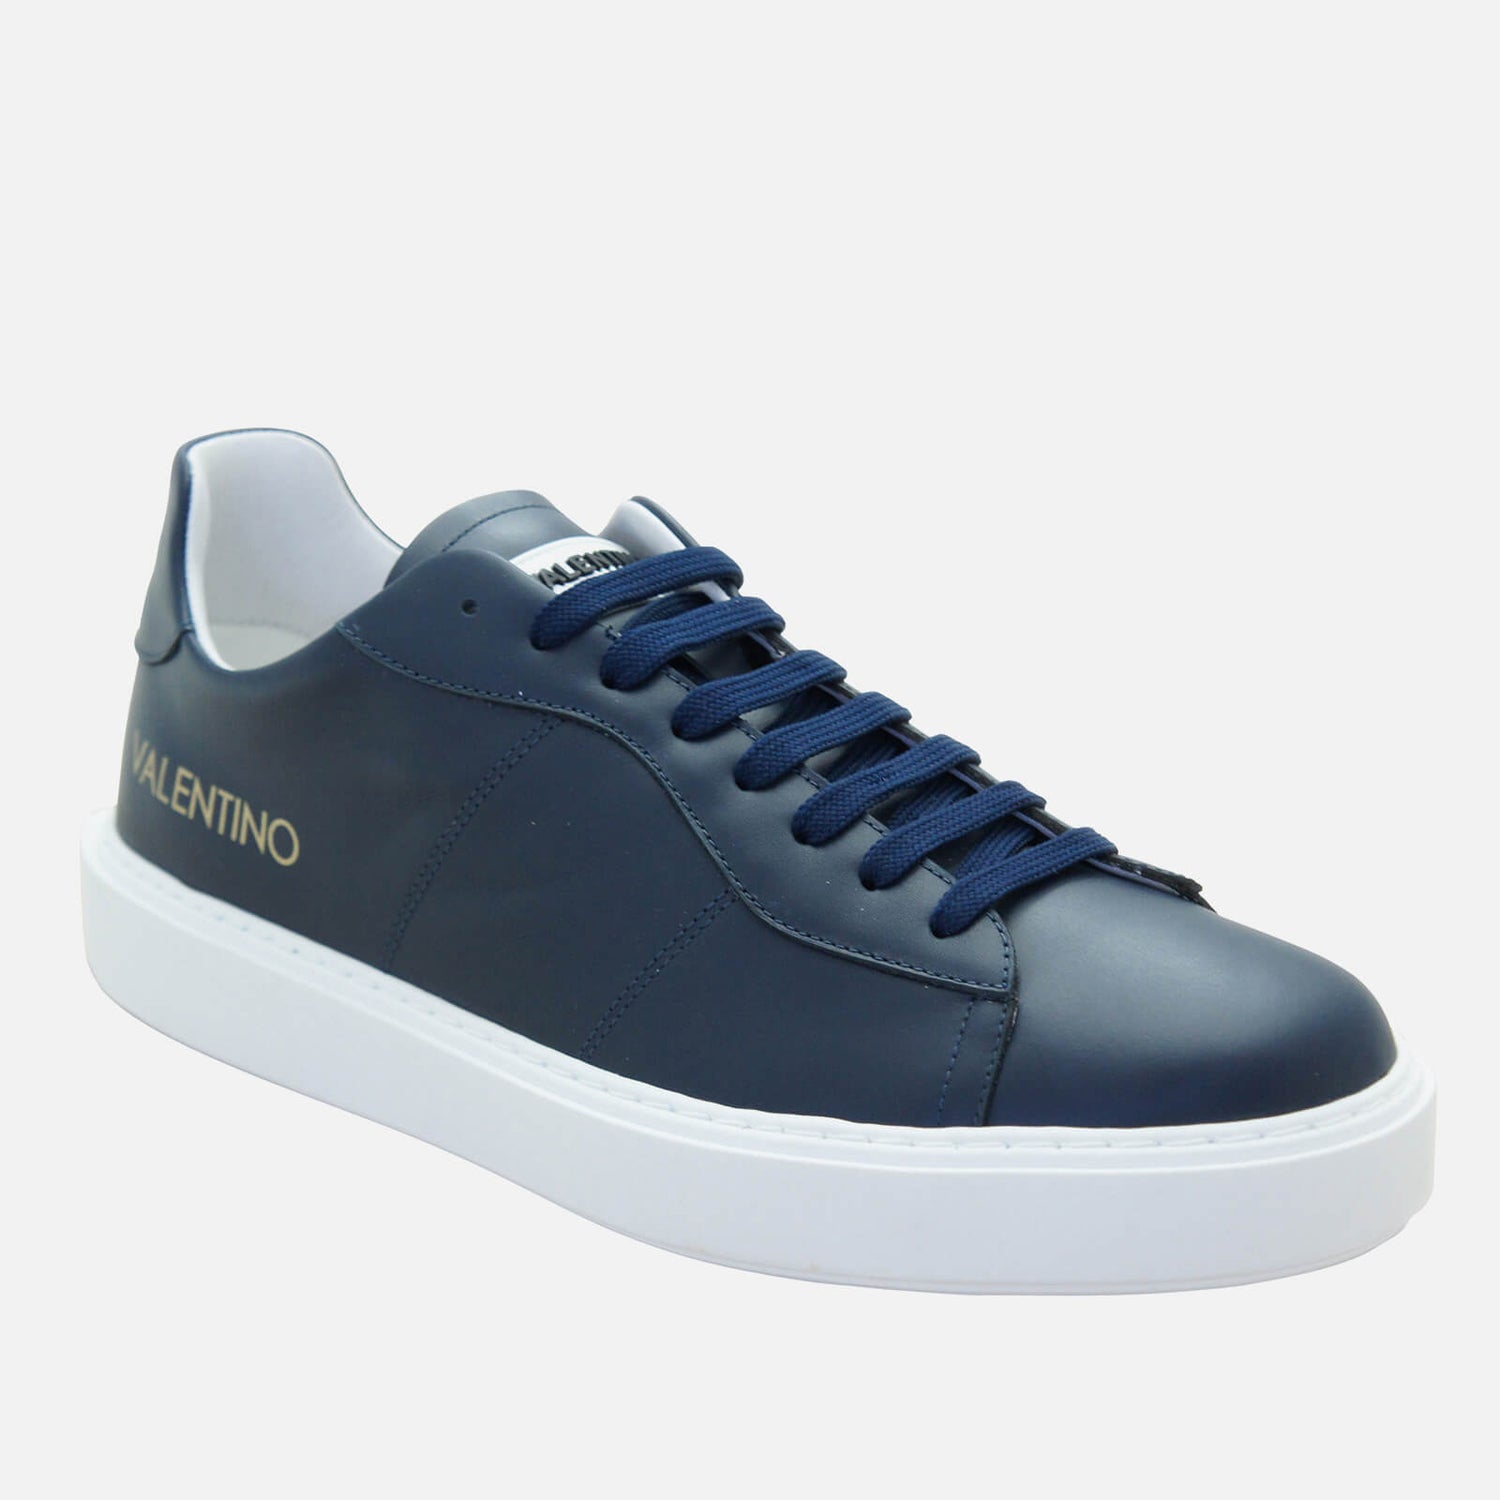 Valentino Men's Leather Cupsole Trainers - Blue